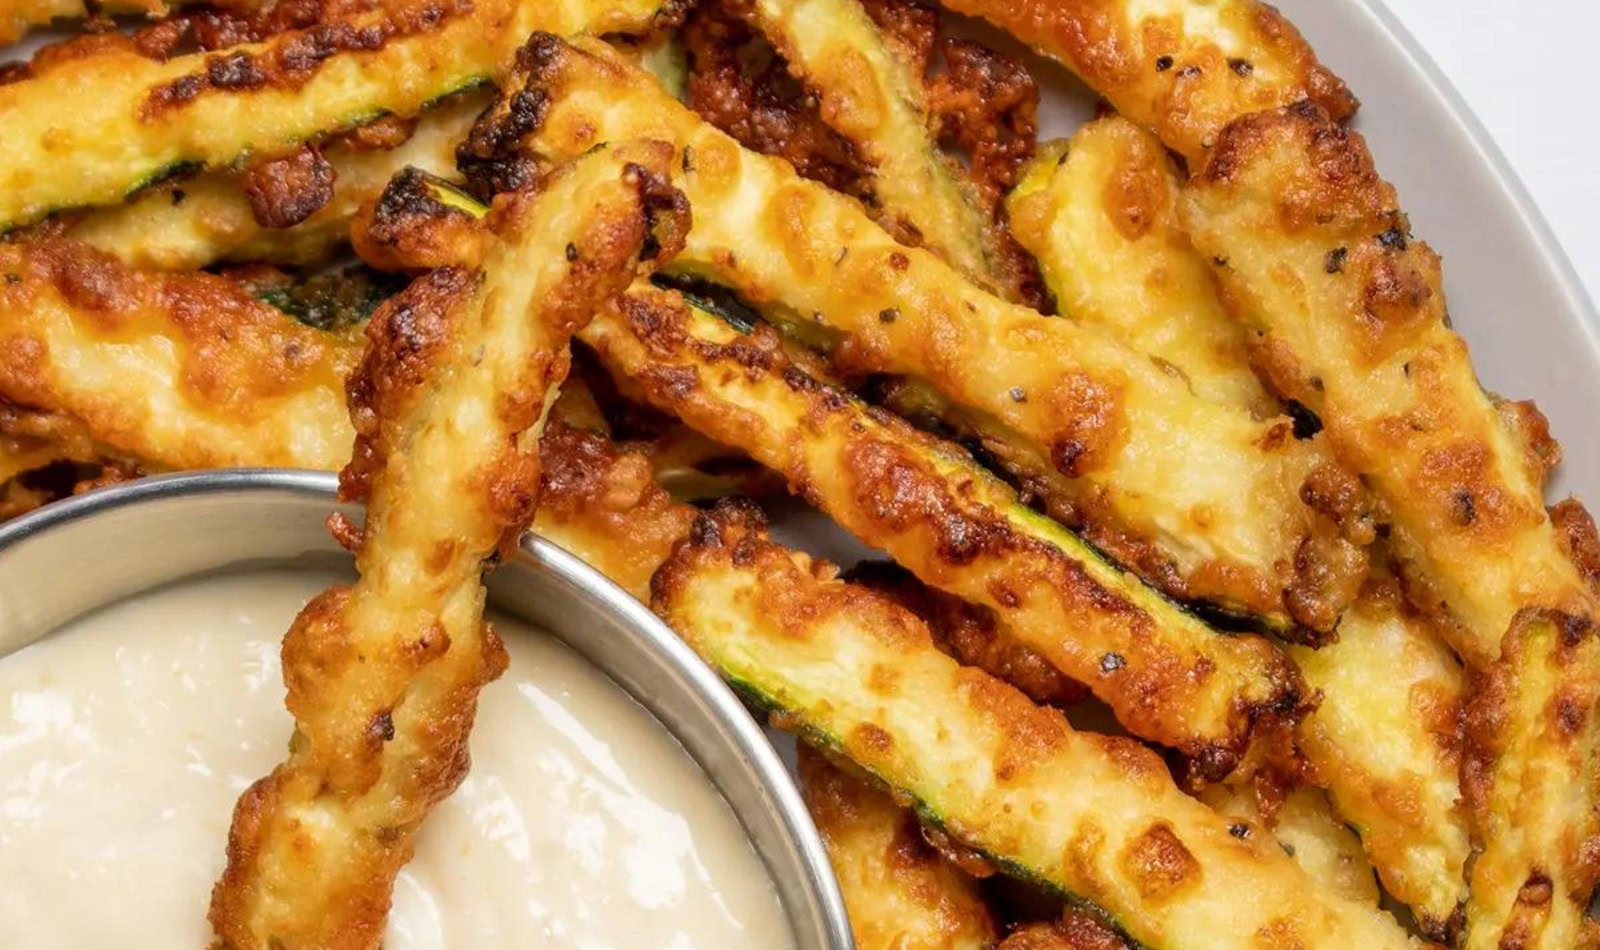 a plate of zucchini fries